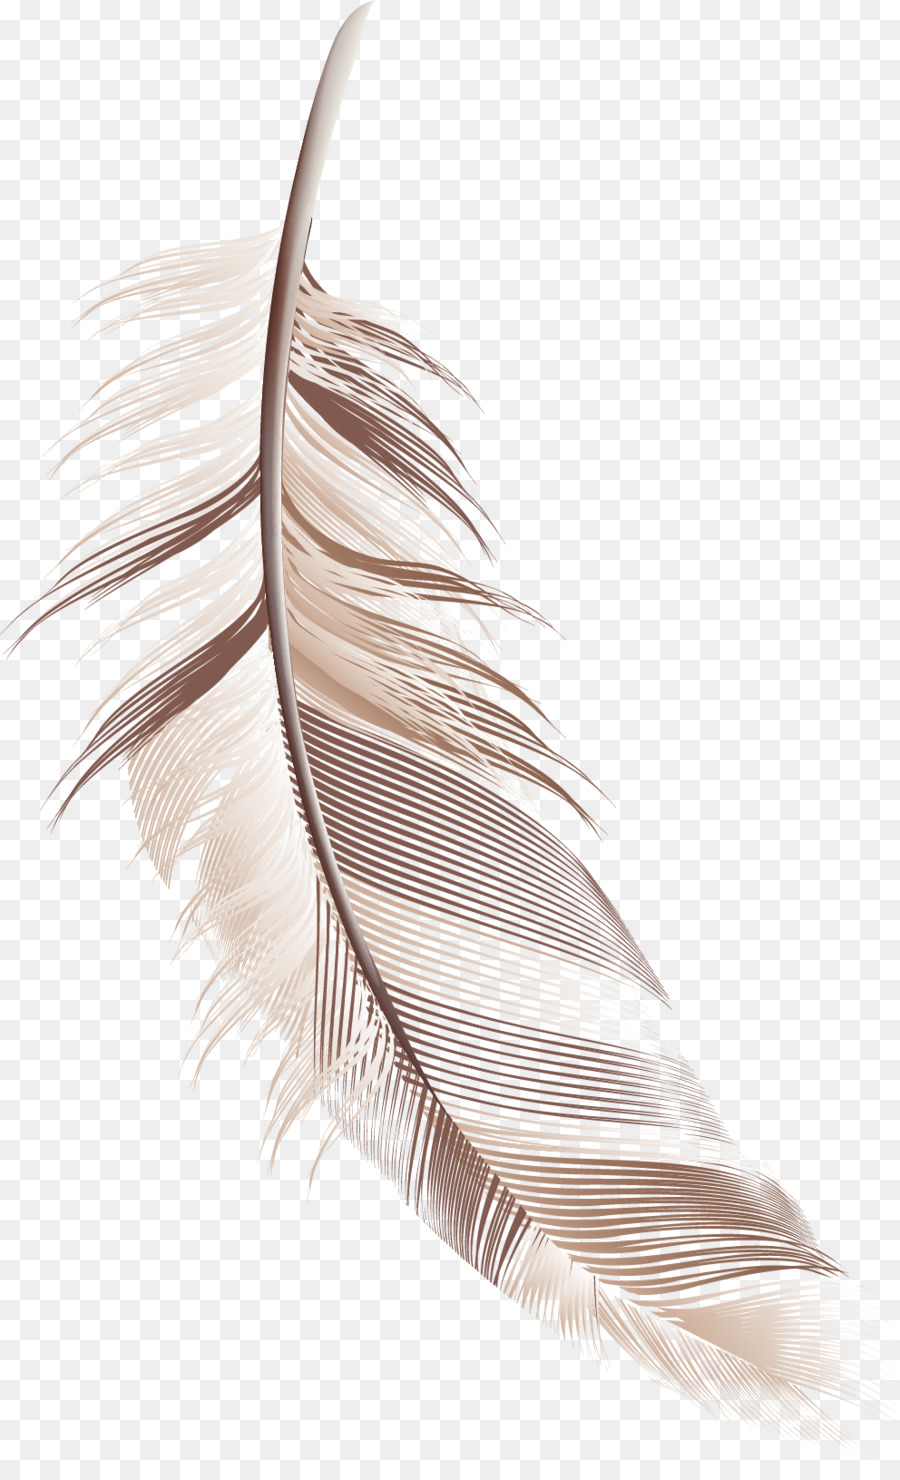 Feather - Cartoon feather material png download - 992*1610 - Free Transparent Feather png Download.